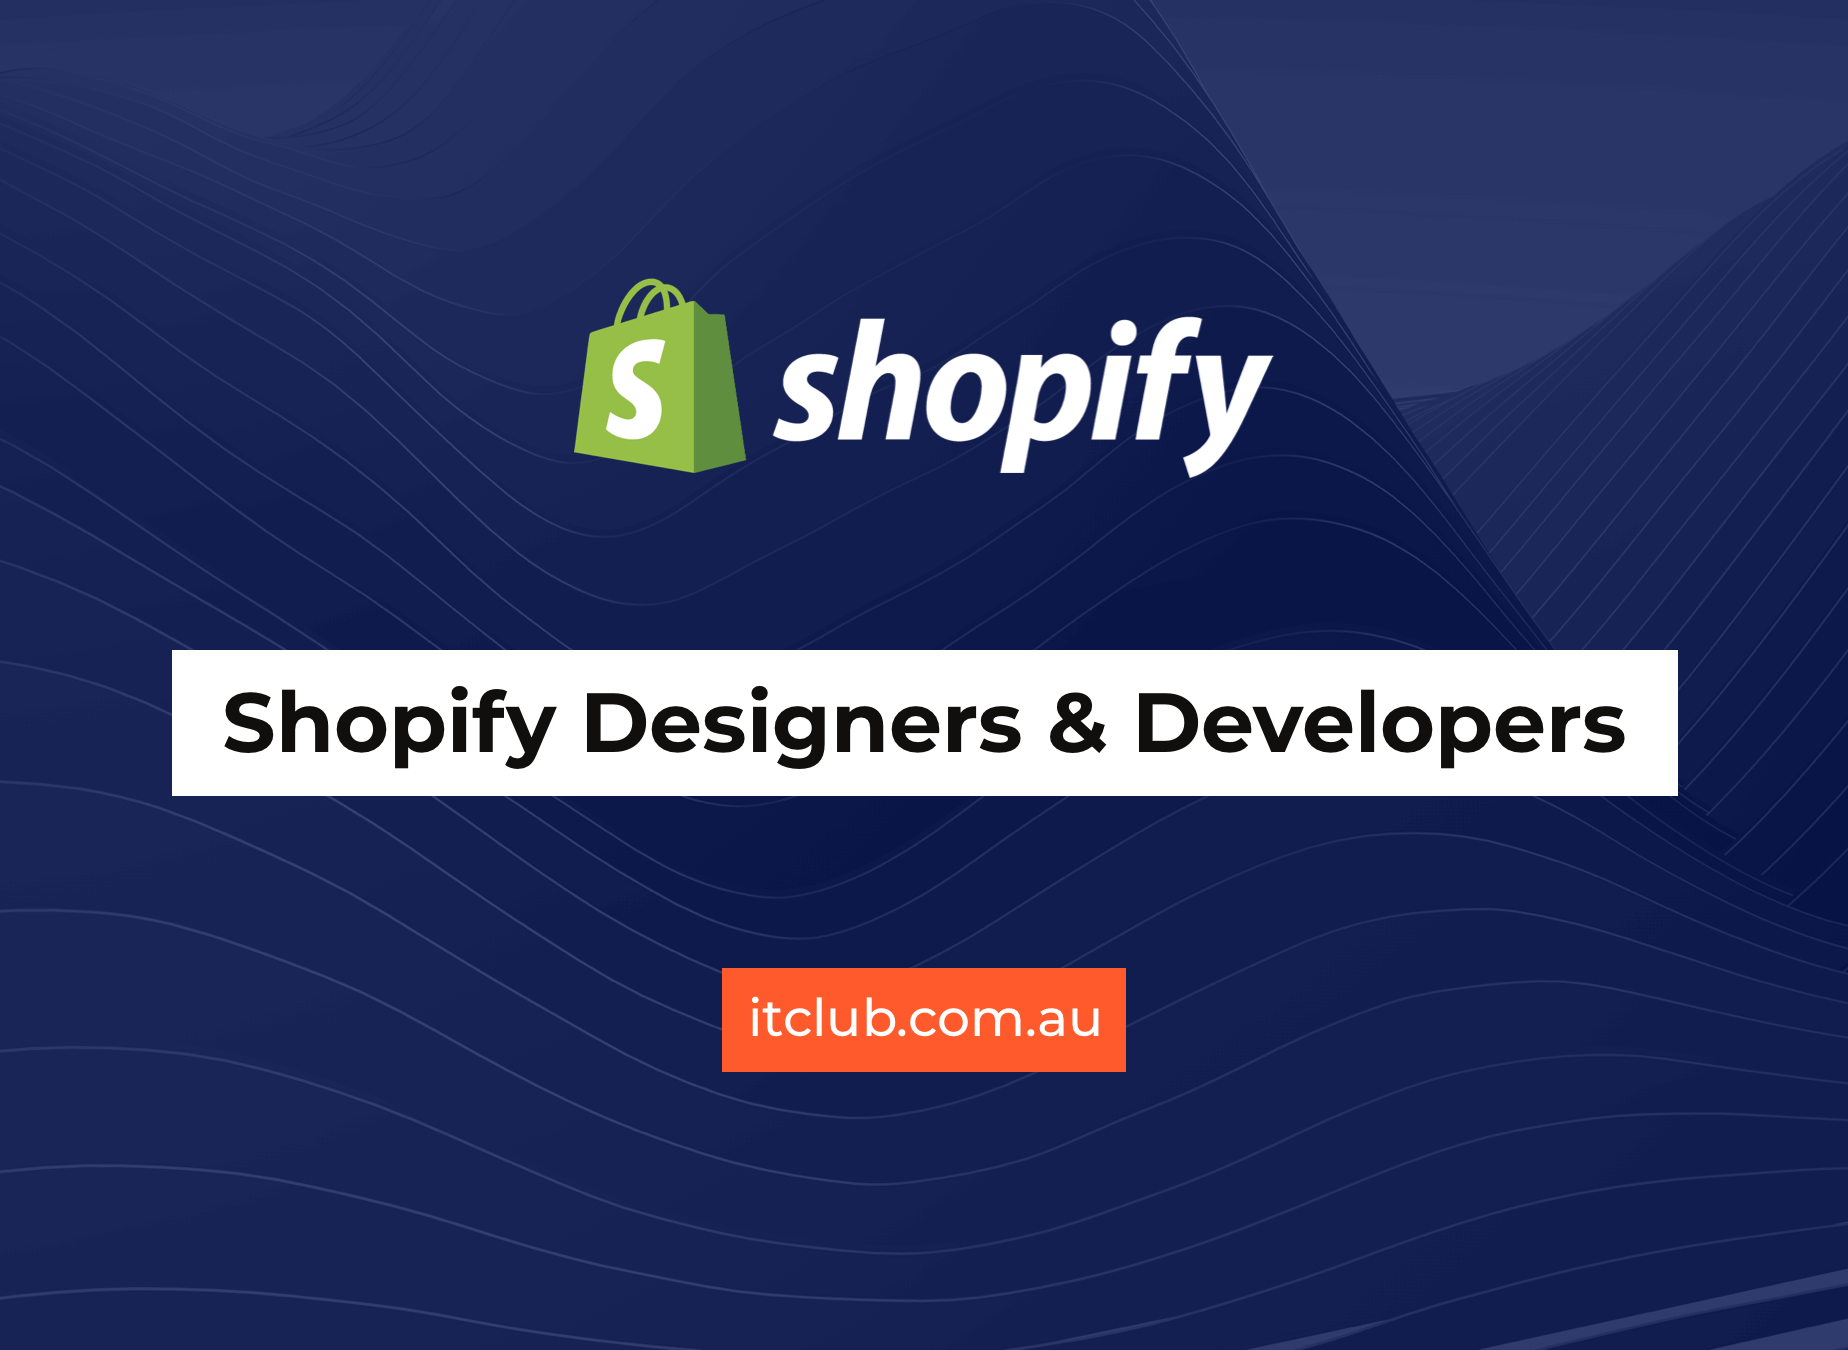 Want to set up a new Shopify store or optimise your existing store for conversion?